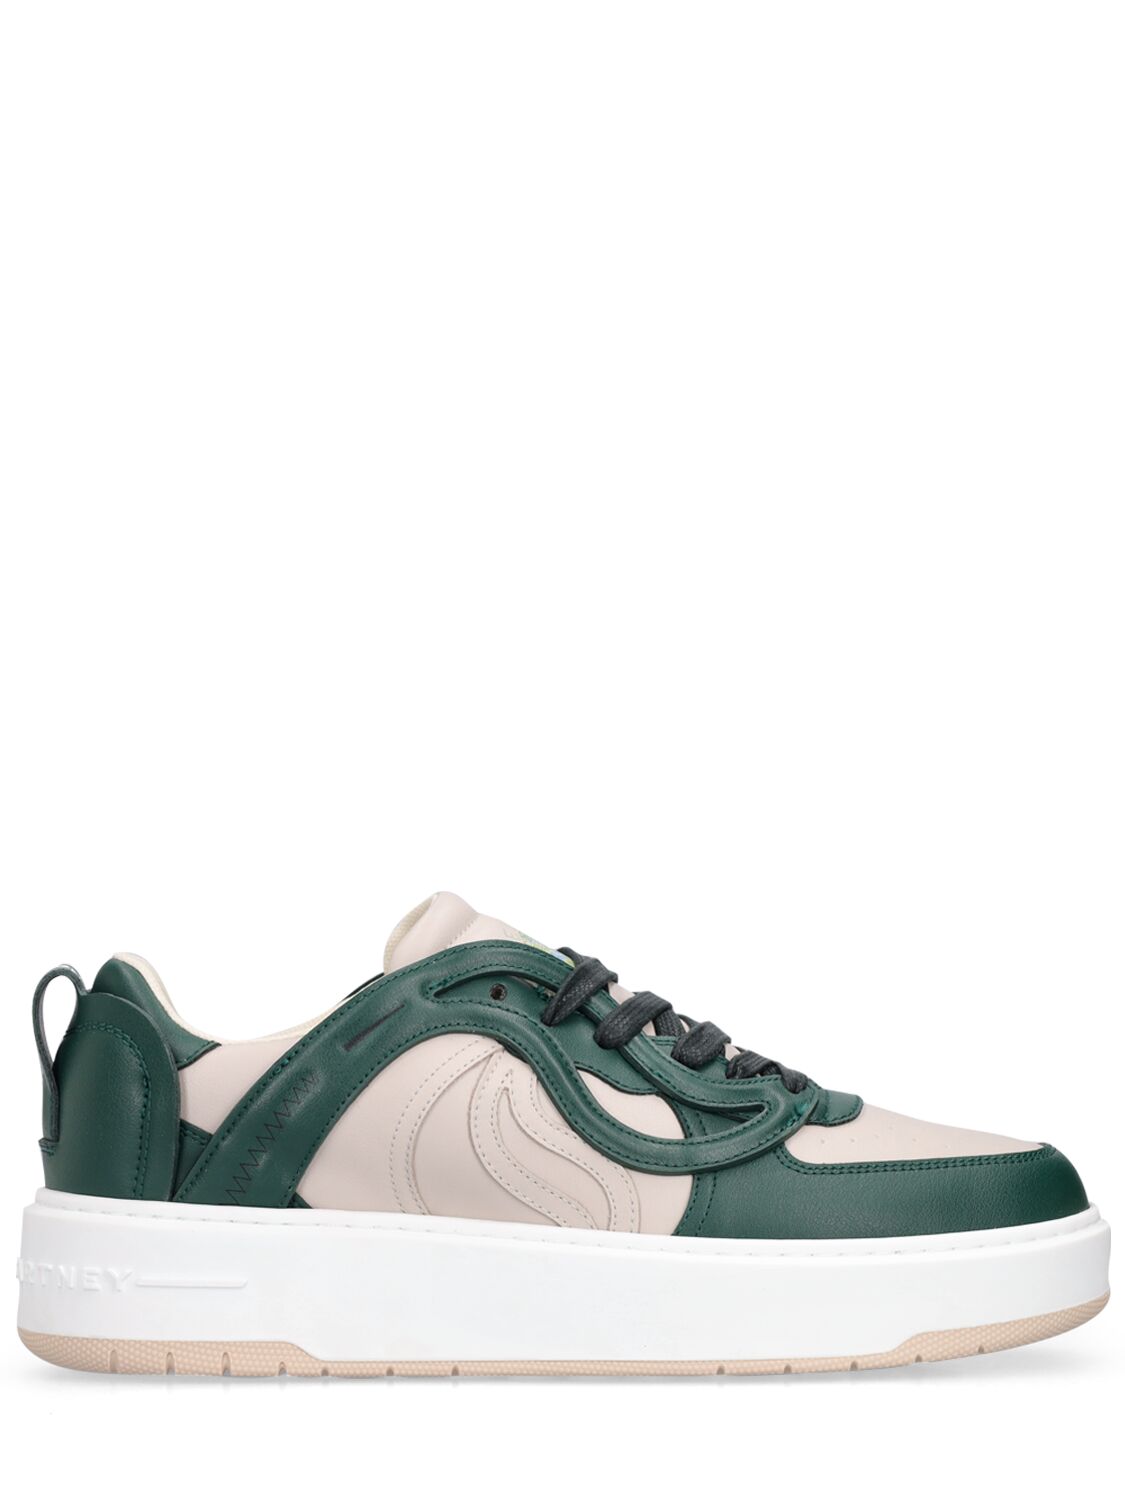 25mm S-wave 1 Alter Sneakers – WOMEN > SHOES > SNEAKERS